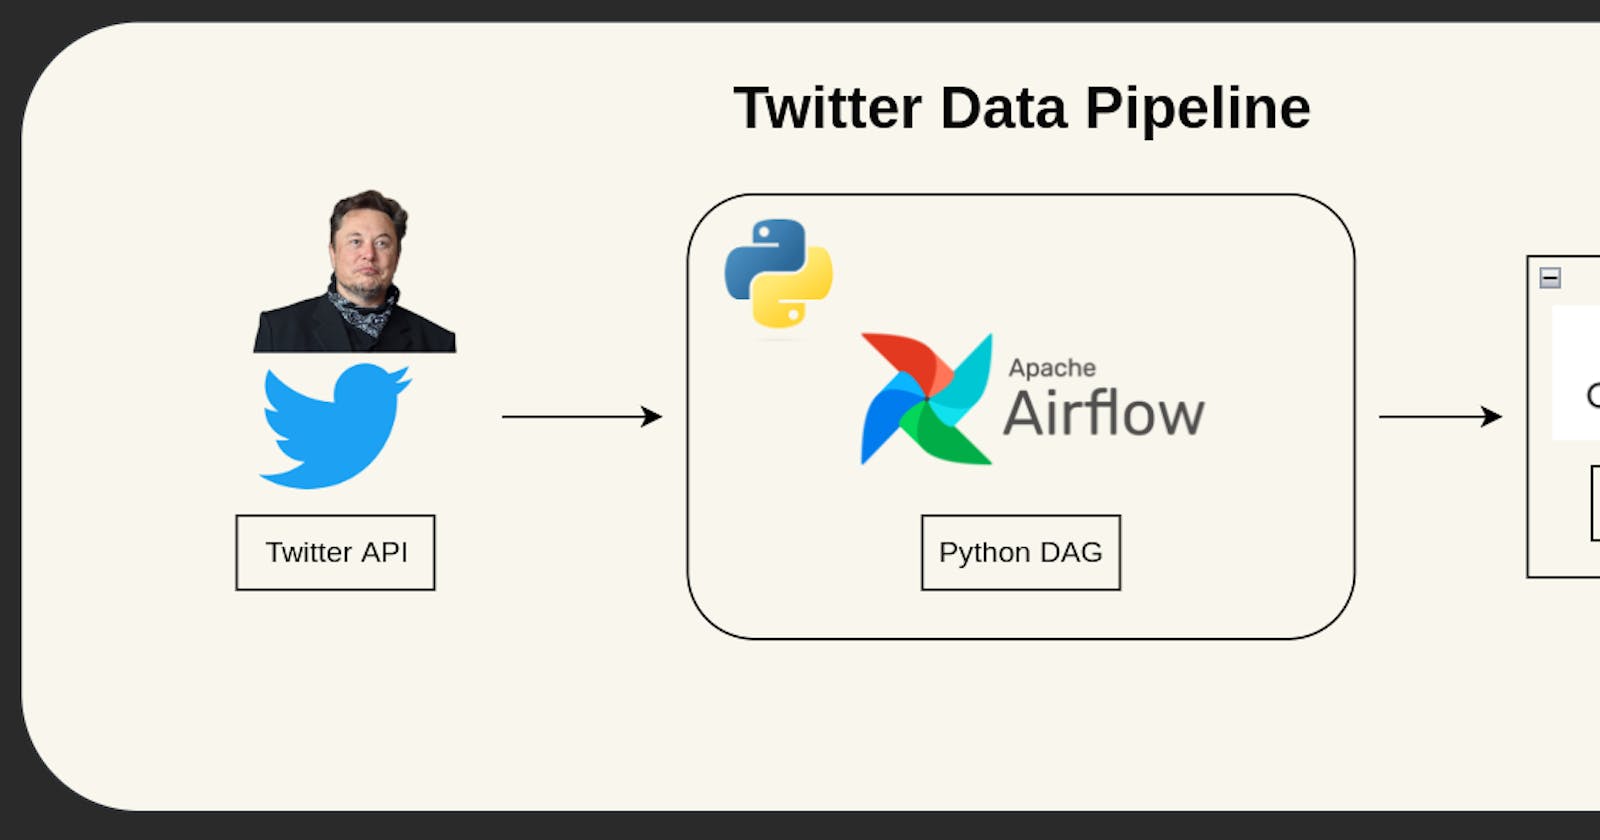 Twitter Data Pipeline with Apache Airflow + MinIO (S3 compatible Object Storage)